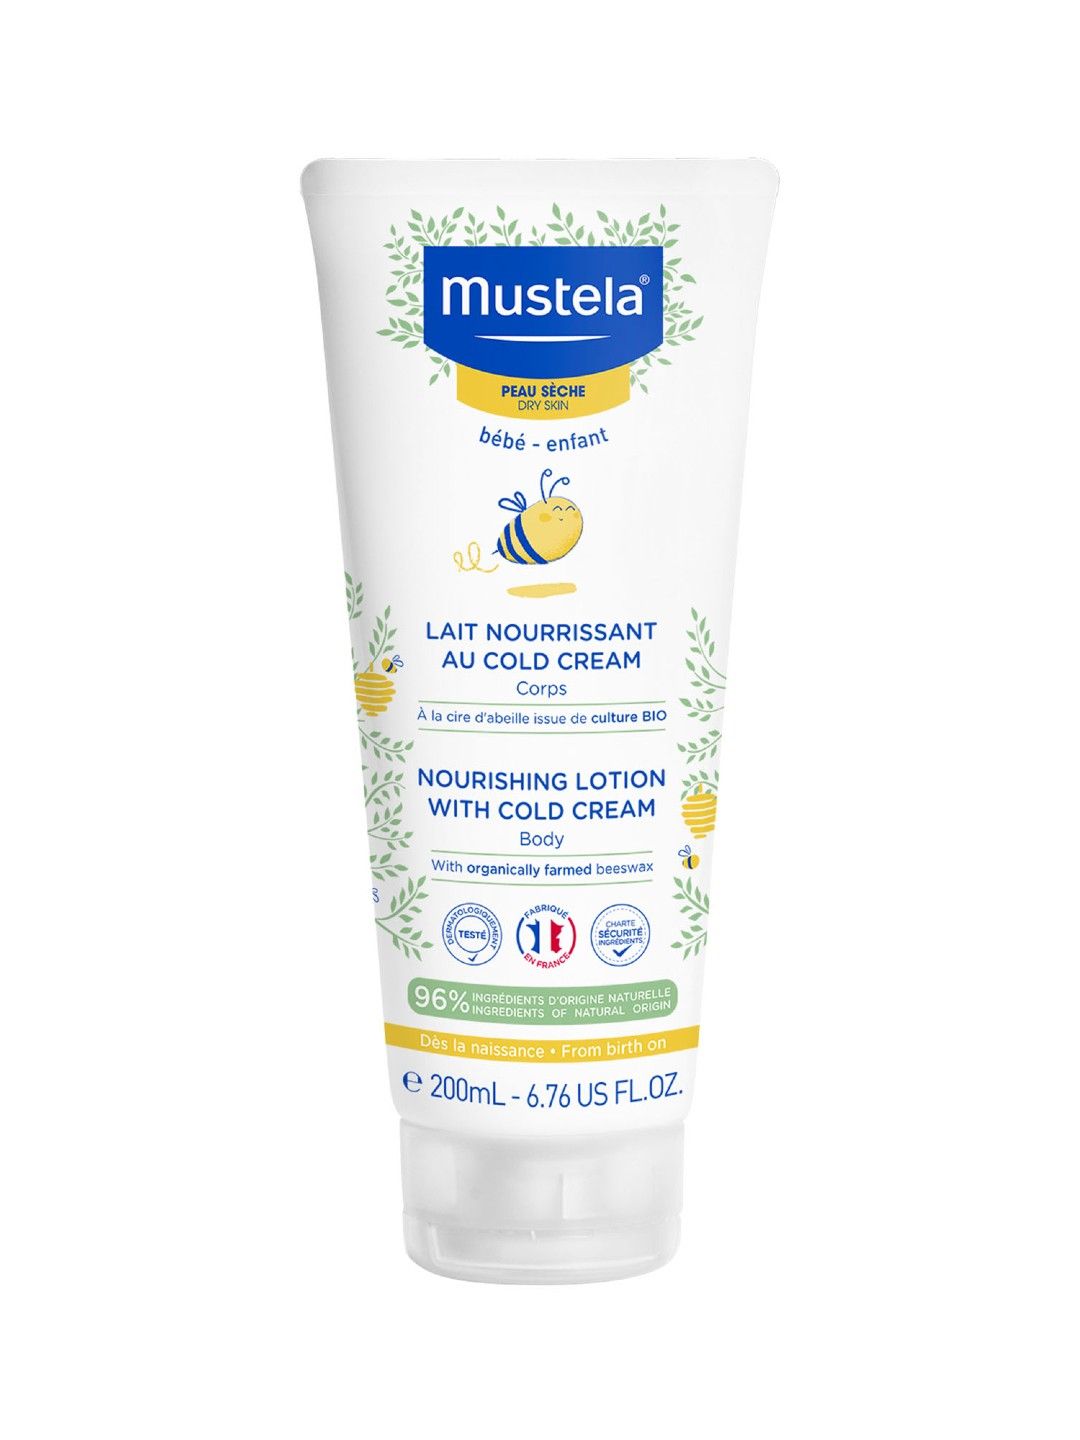 Mustela Nourishing Lotion With Cold Cream (200ml)